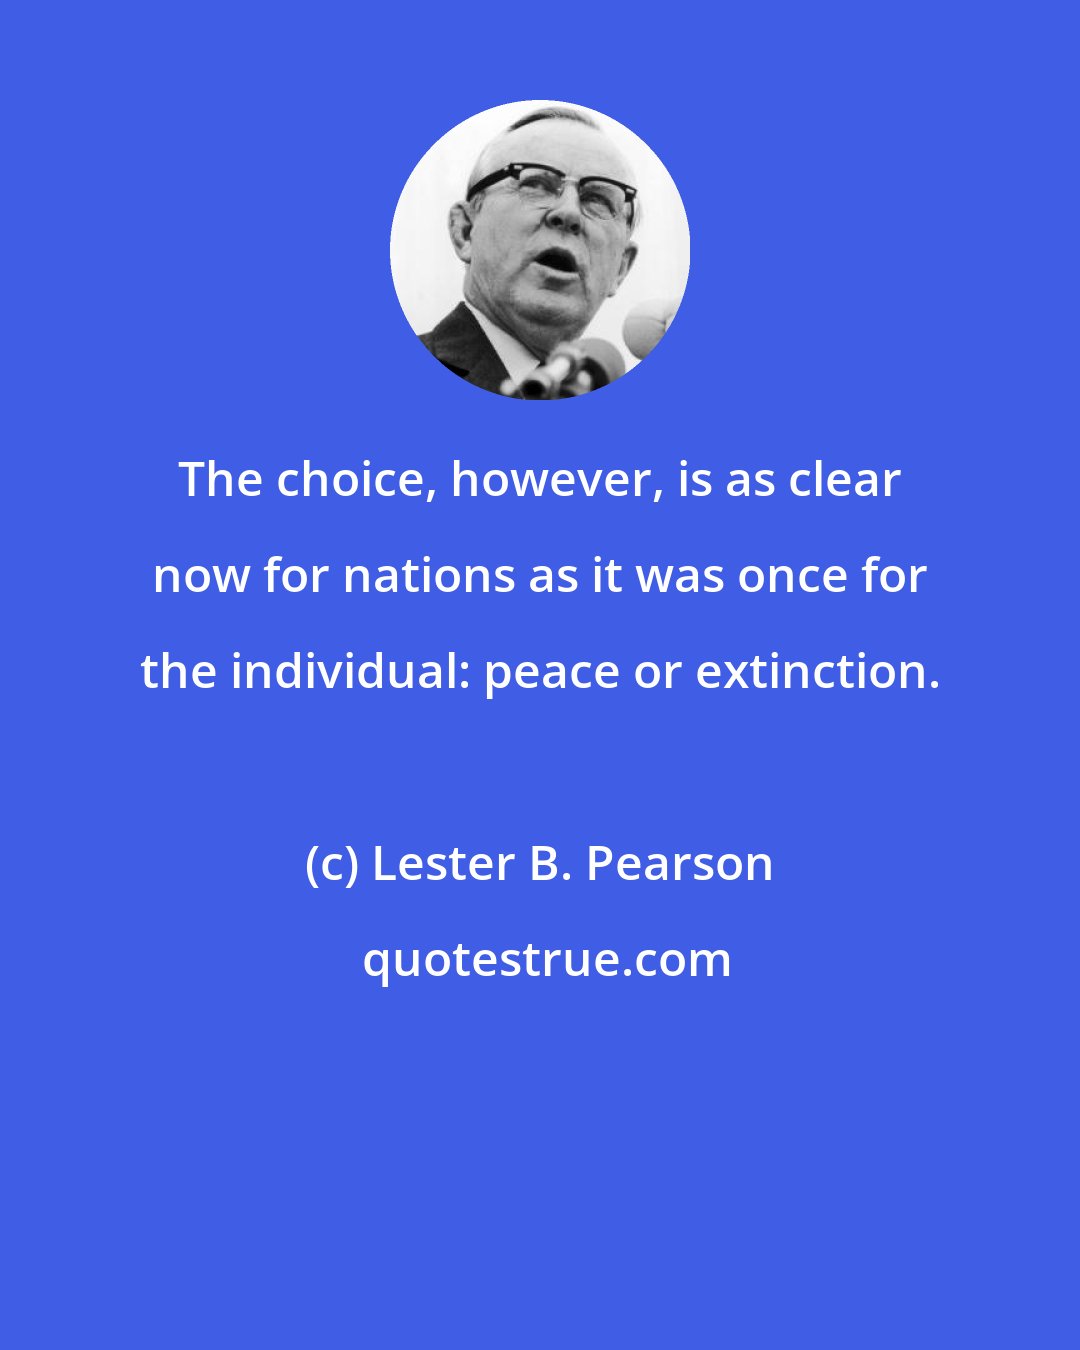 Lester B. Pearson: The choice, however, is as clear now for nations as it was once for the individual: peace or extinction.